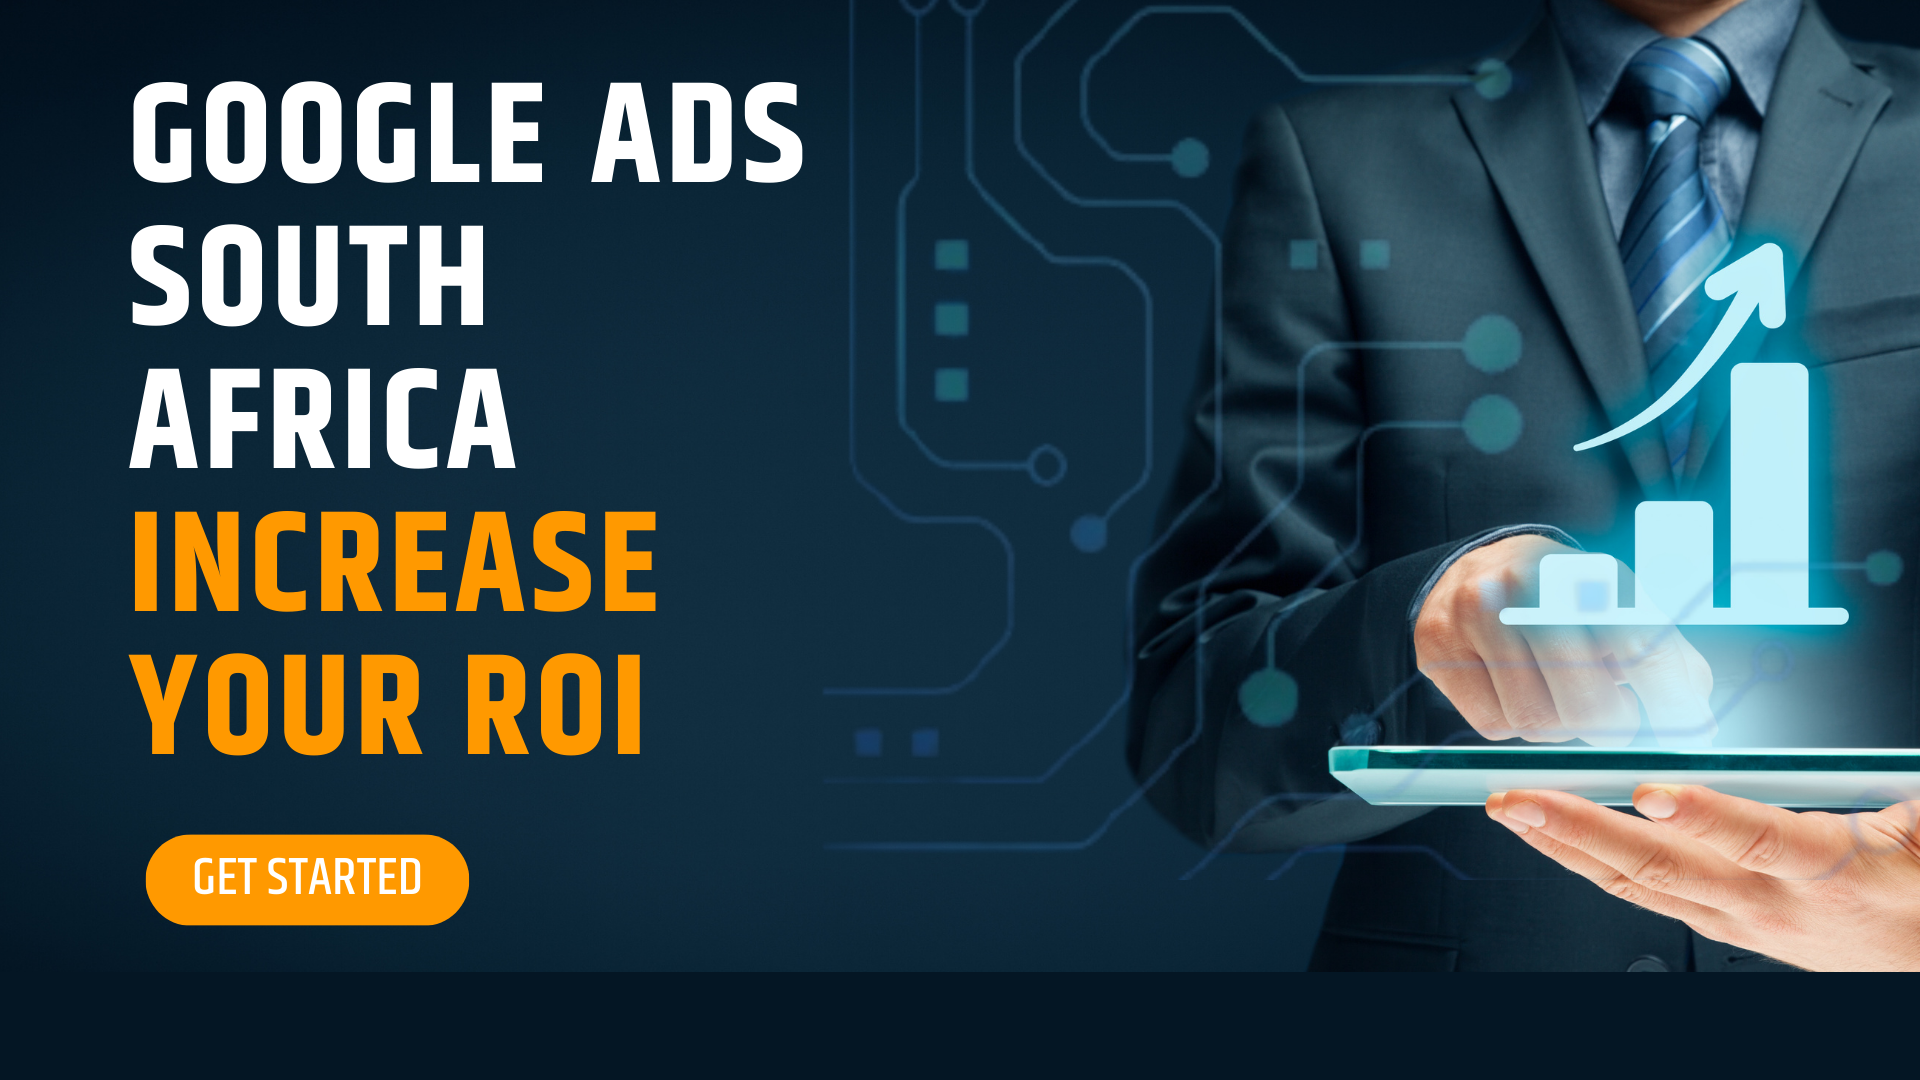 Google Ads South Africa - Increase ROI